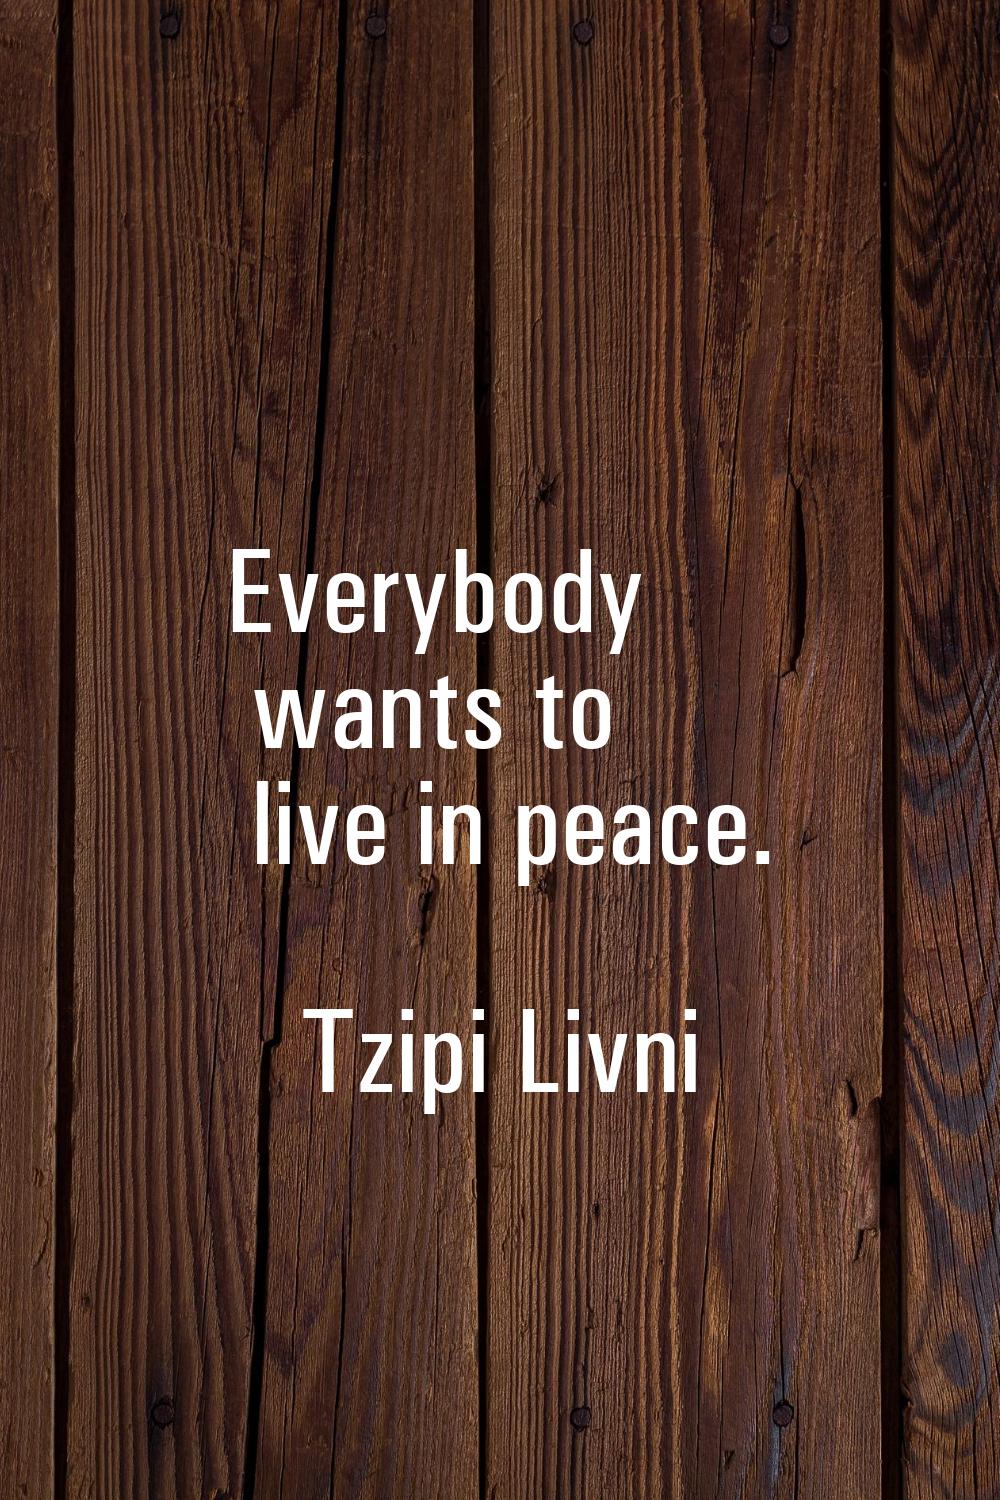 Everybody wants to live in peace.